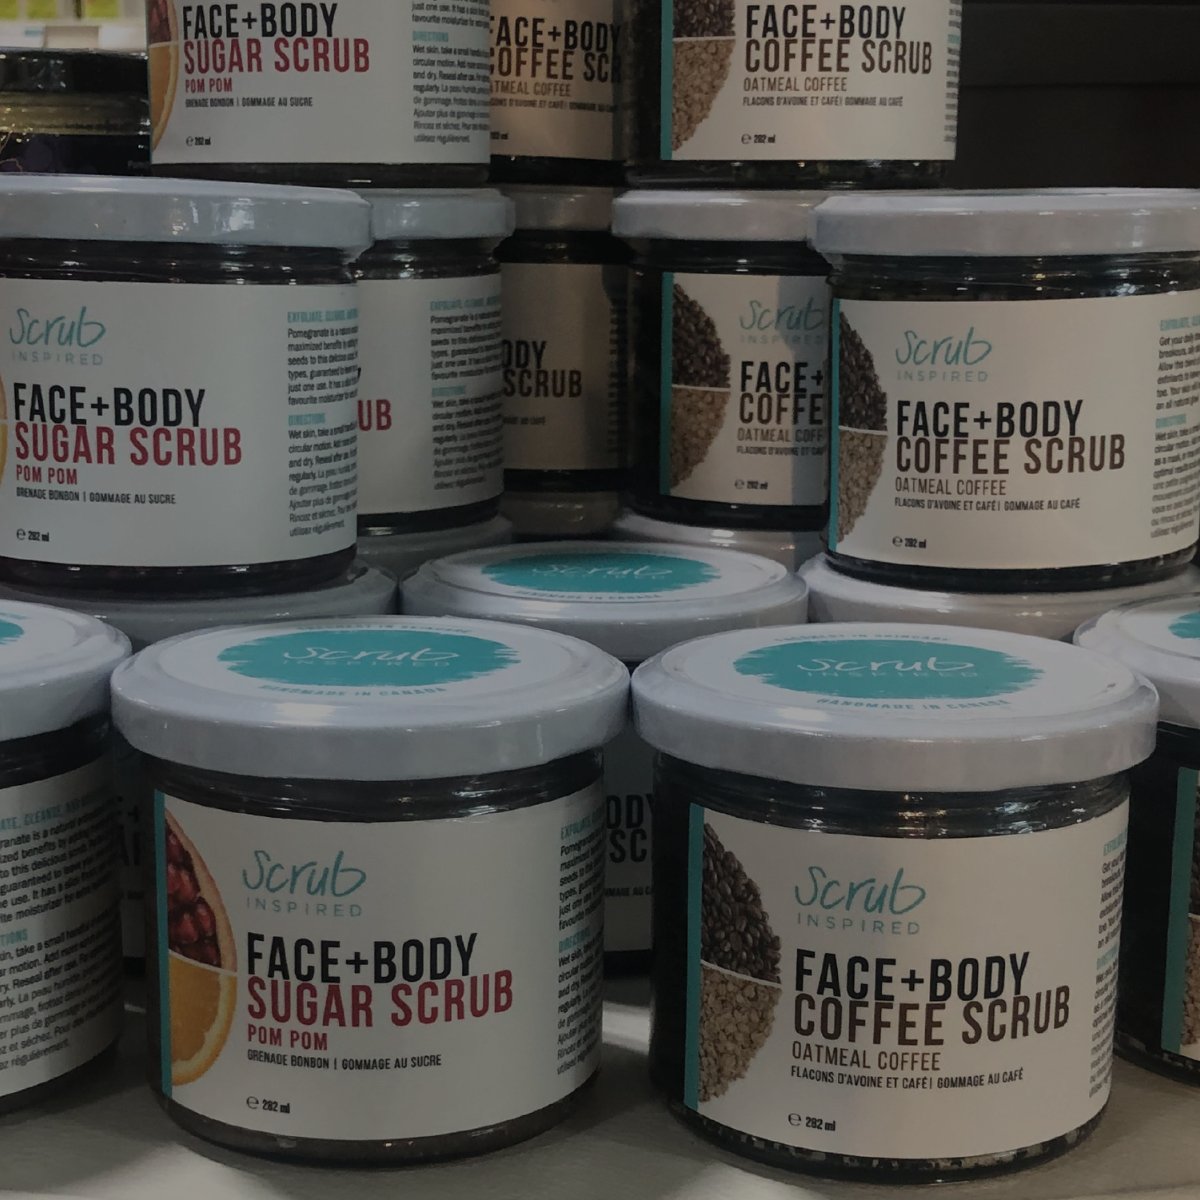 Shop all products: sugar scrubs for face and body, dead sea salt scrubs for body and feet, facial clay masks, body butter, epsom salts for the bath, skin care bundles. Handmade in Cape Breton, Canada. Scrub Inspired's products are vegan, and cruelty-free.